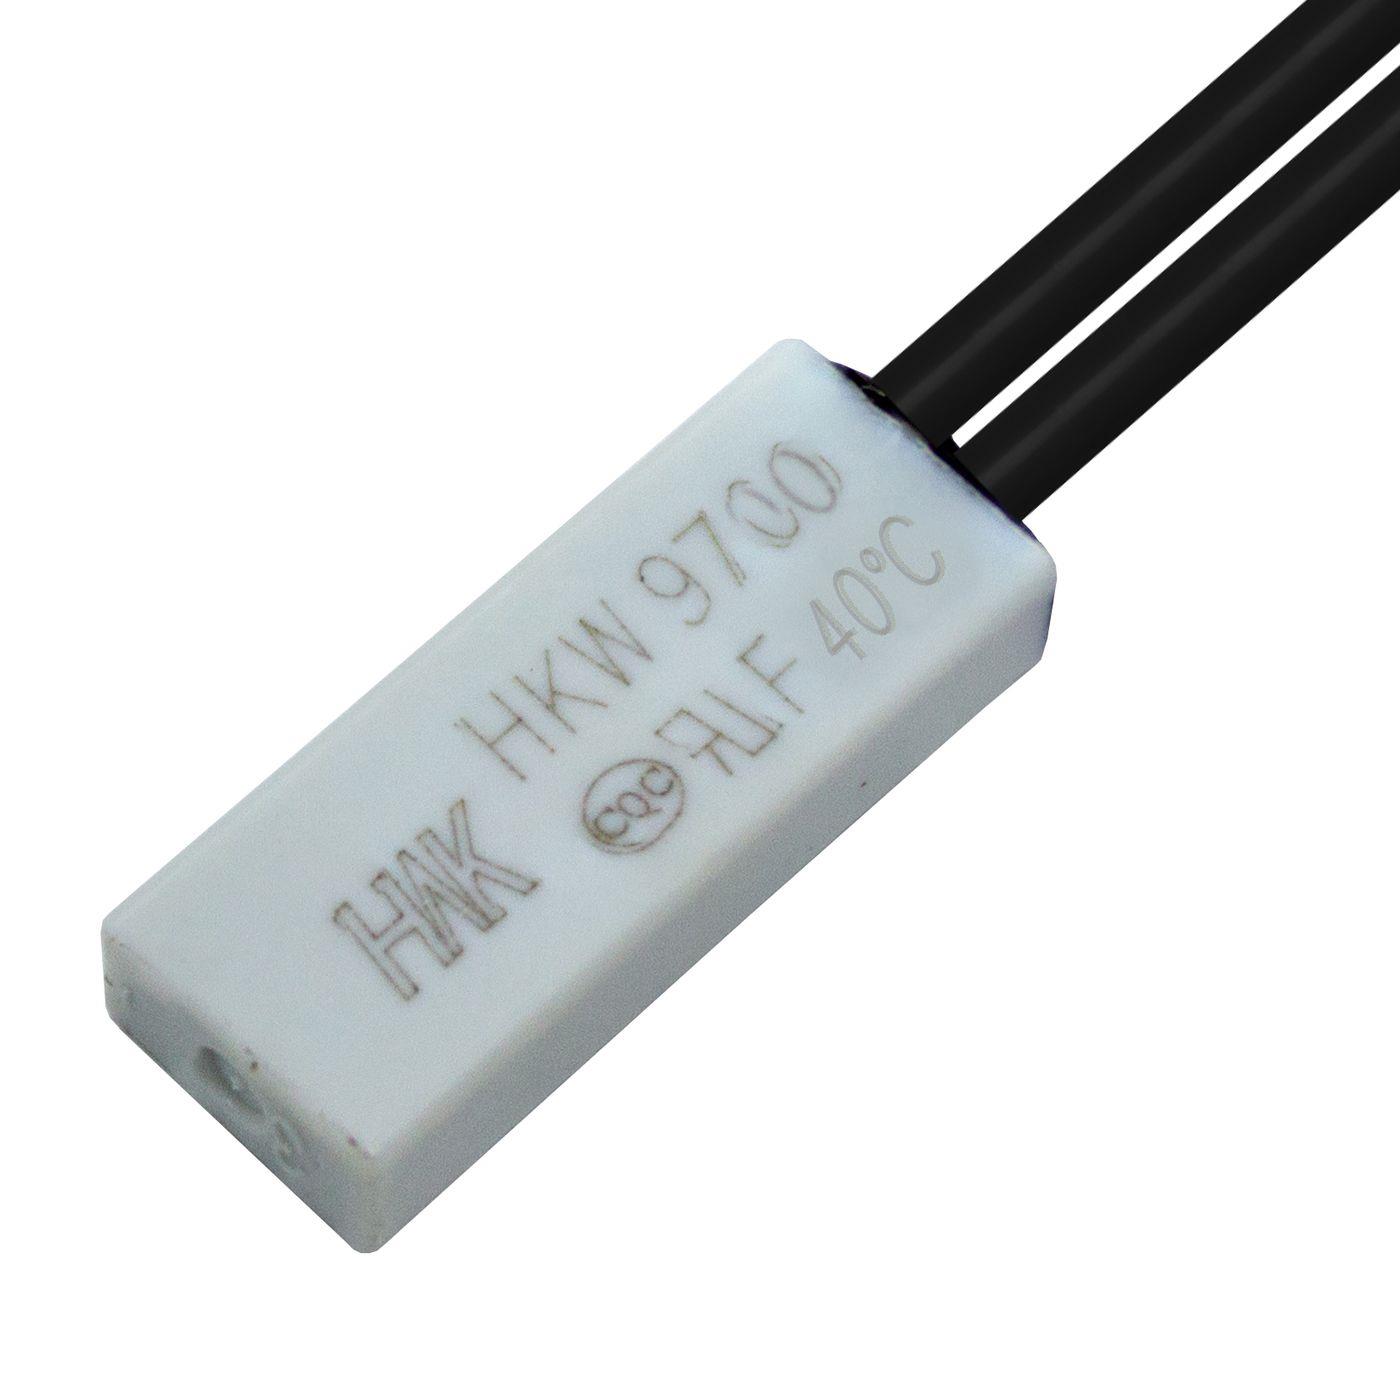 Thermal switch 40°C NO contact 250V 5A Cable Temperature switch thermostat Bimetal Thermal protection